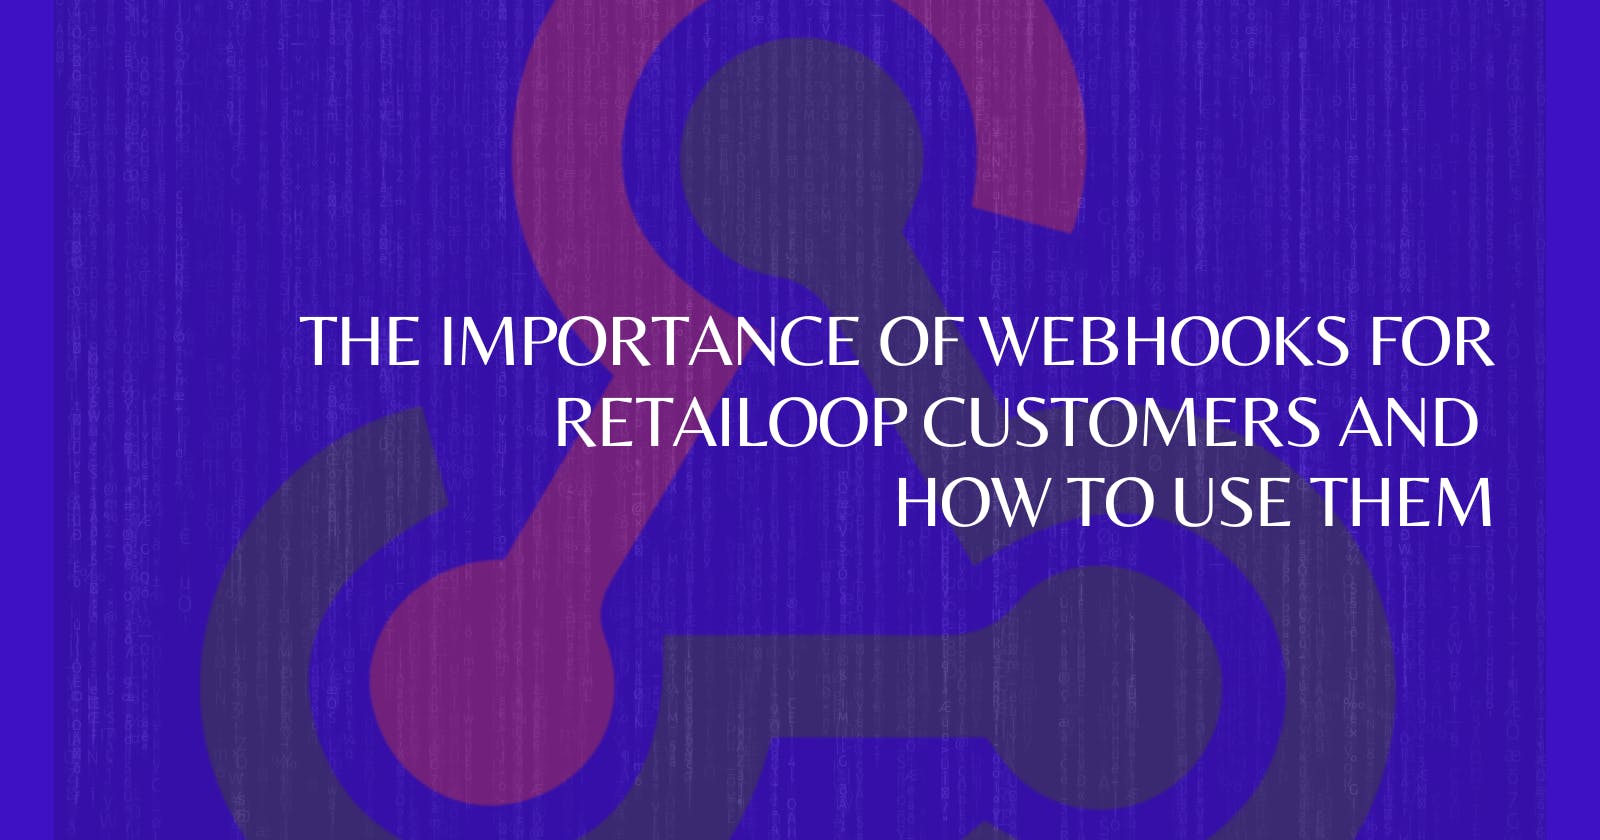 The Importance of Webhooks for Retailoop Customers and How to Use Them